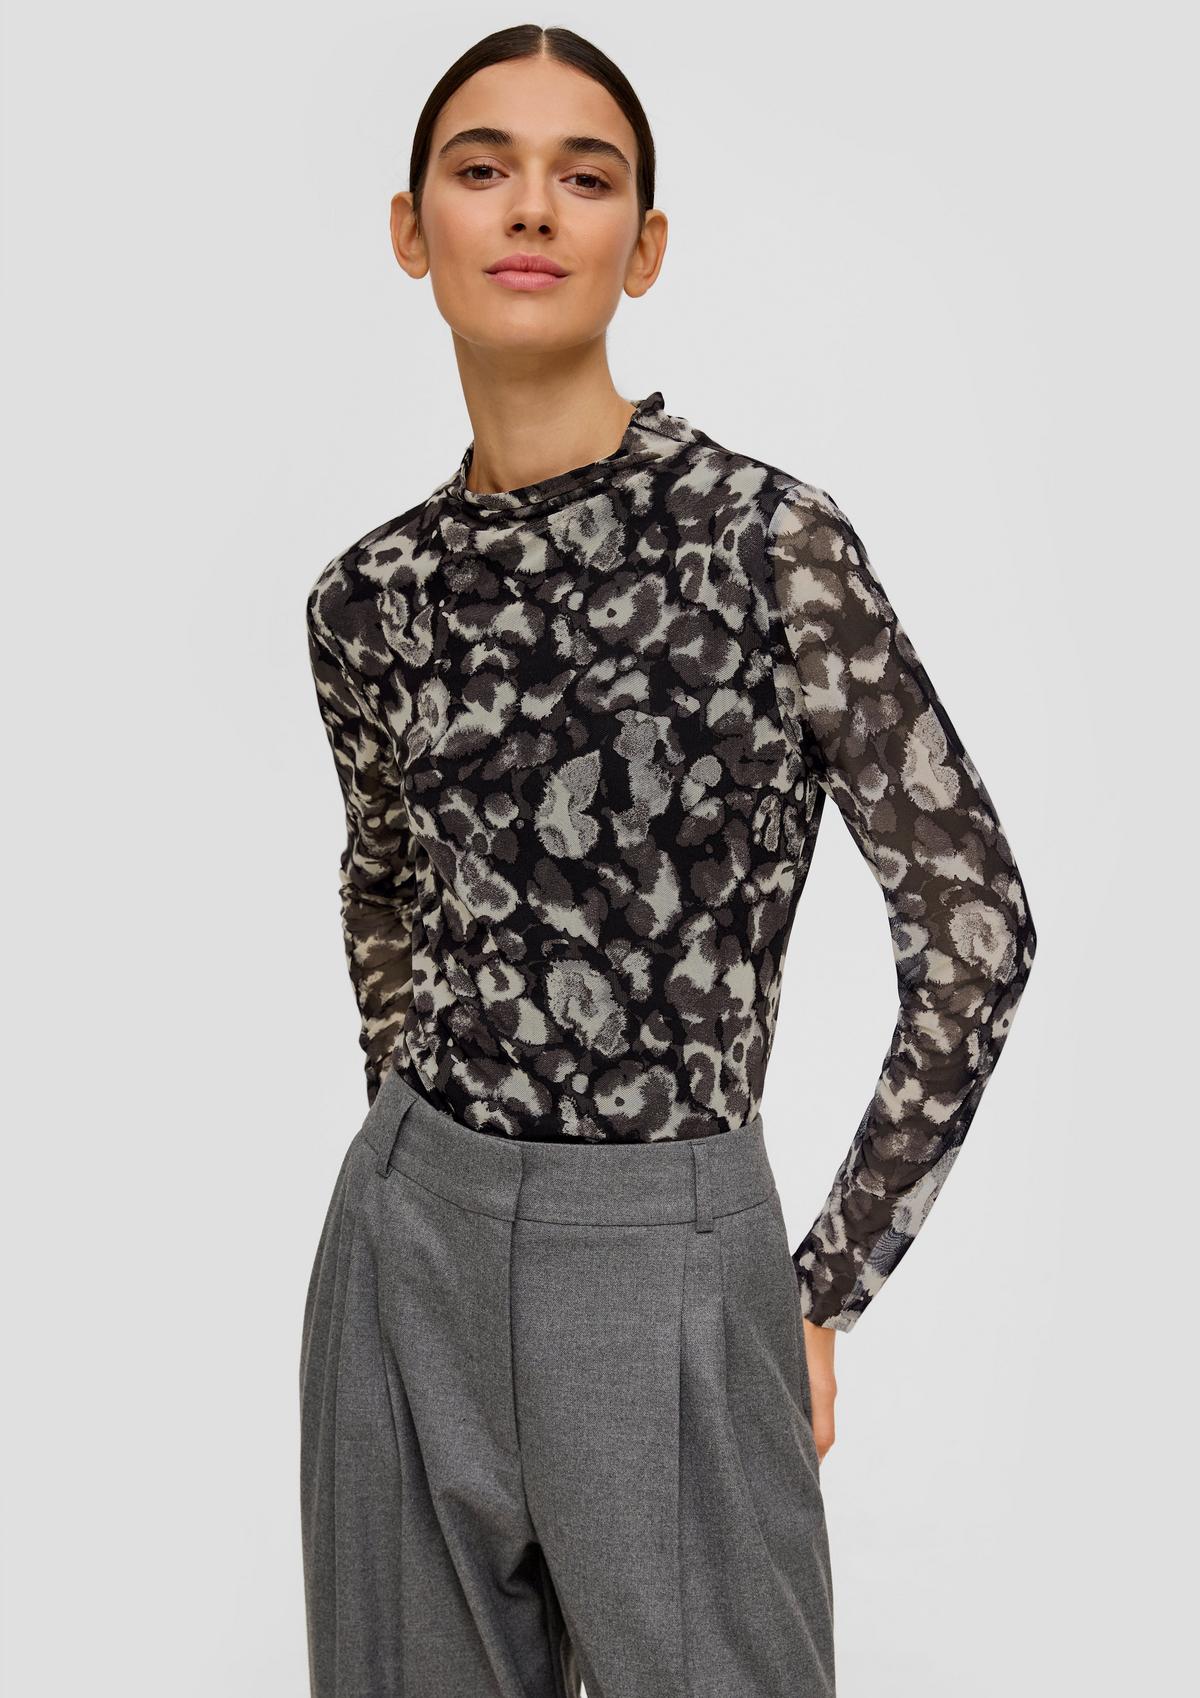 Long sleeve top with an integrated top